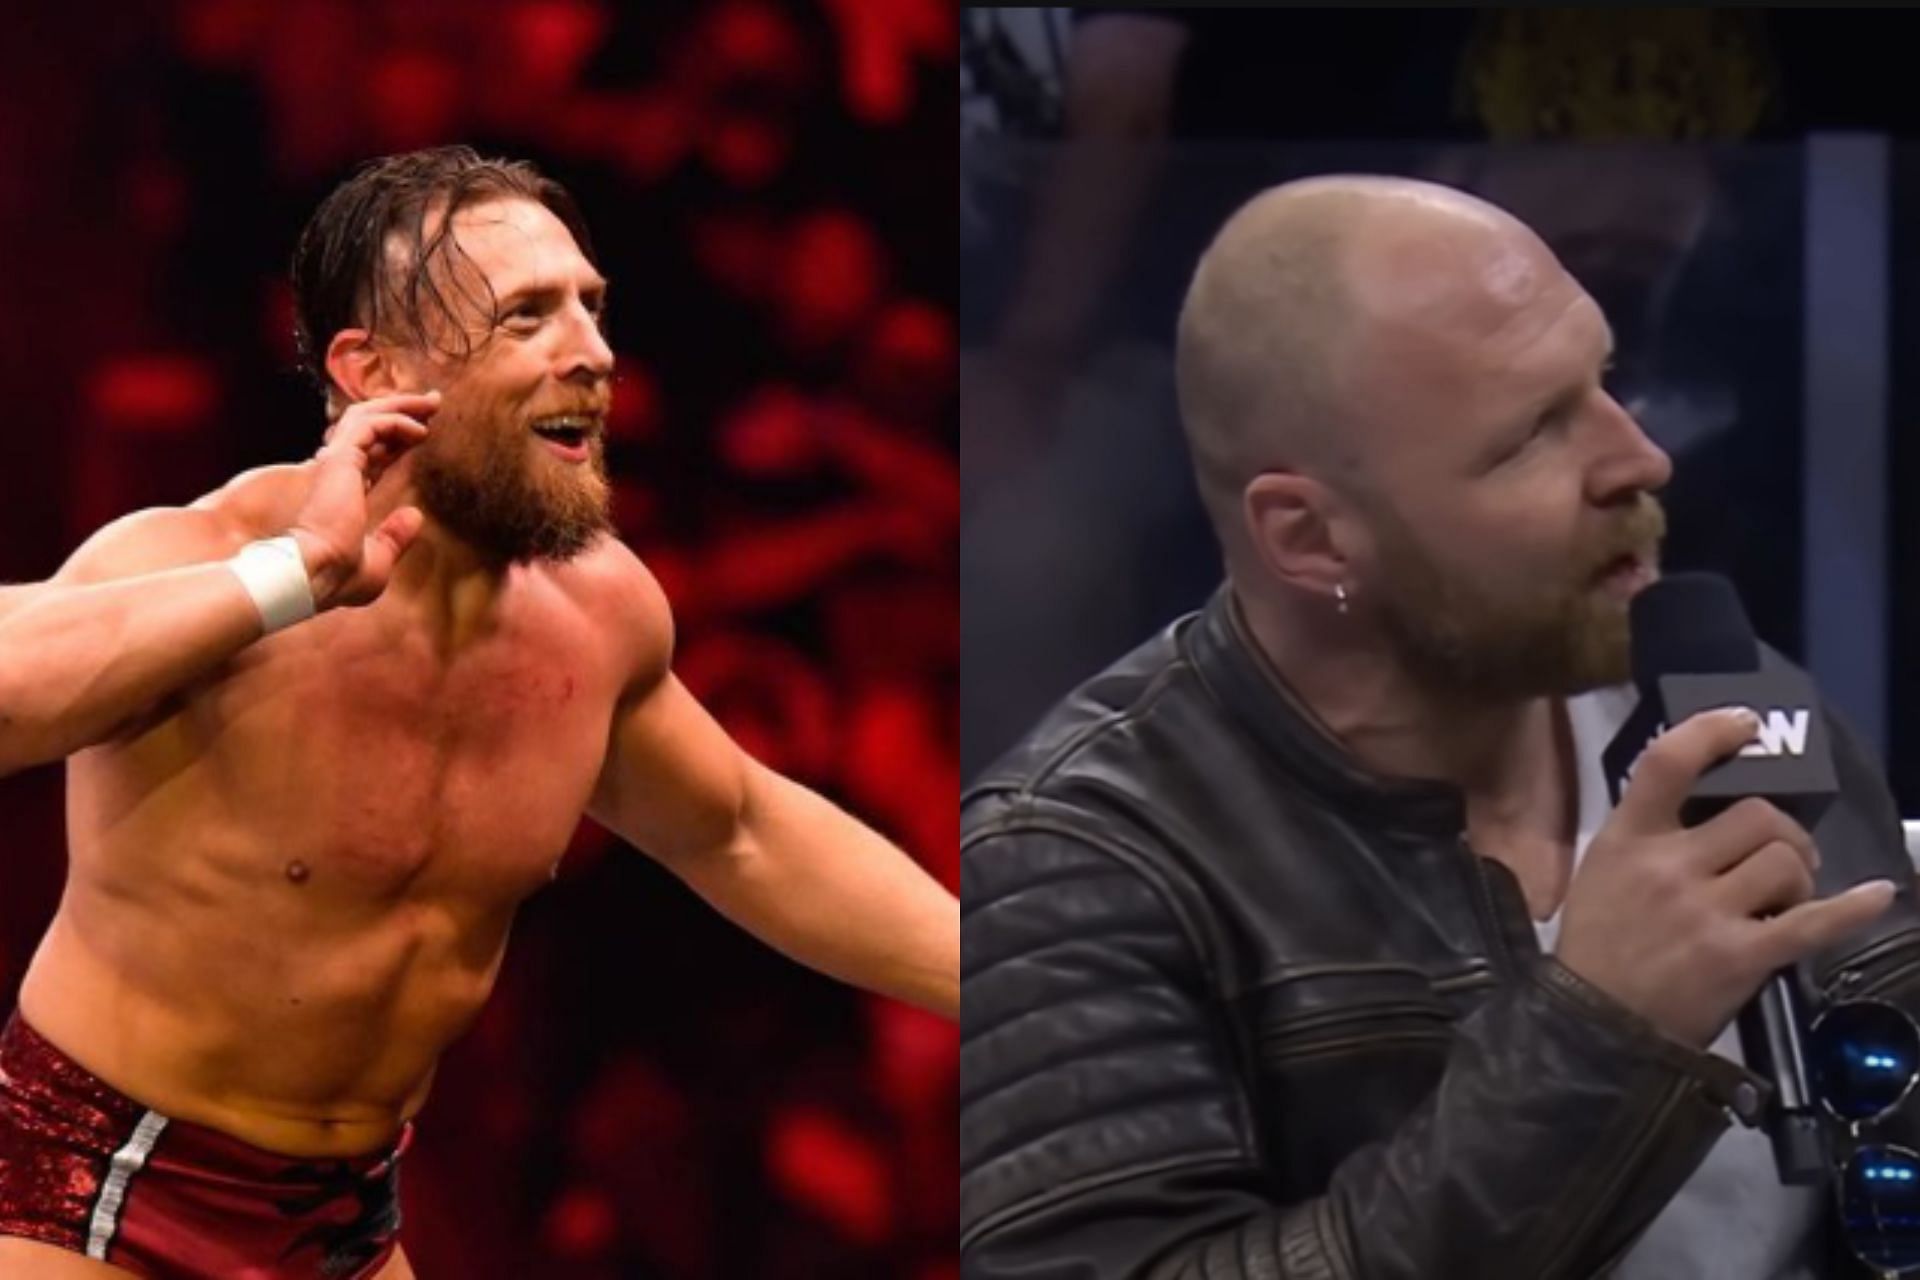 Three probable storylines for Bryan Danielson